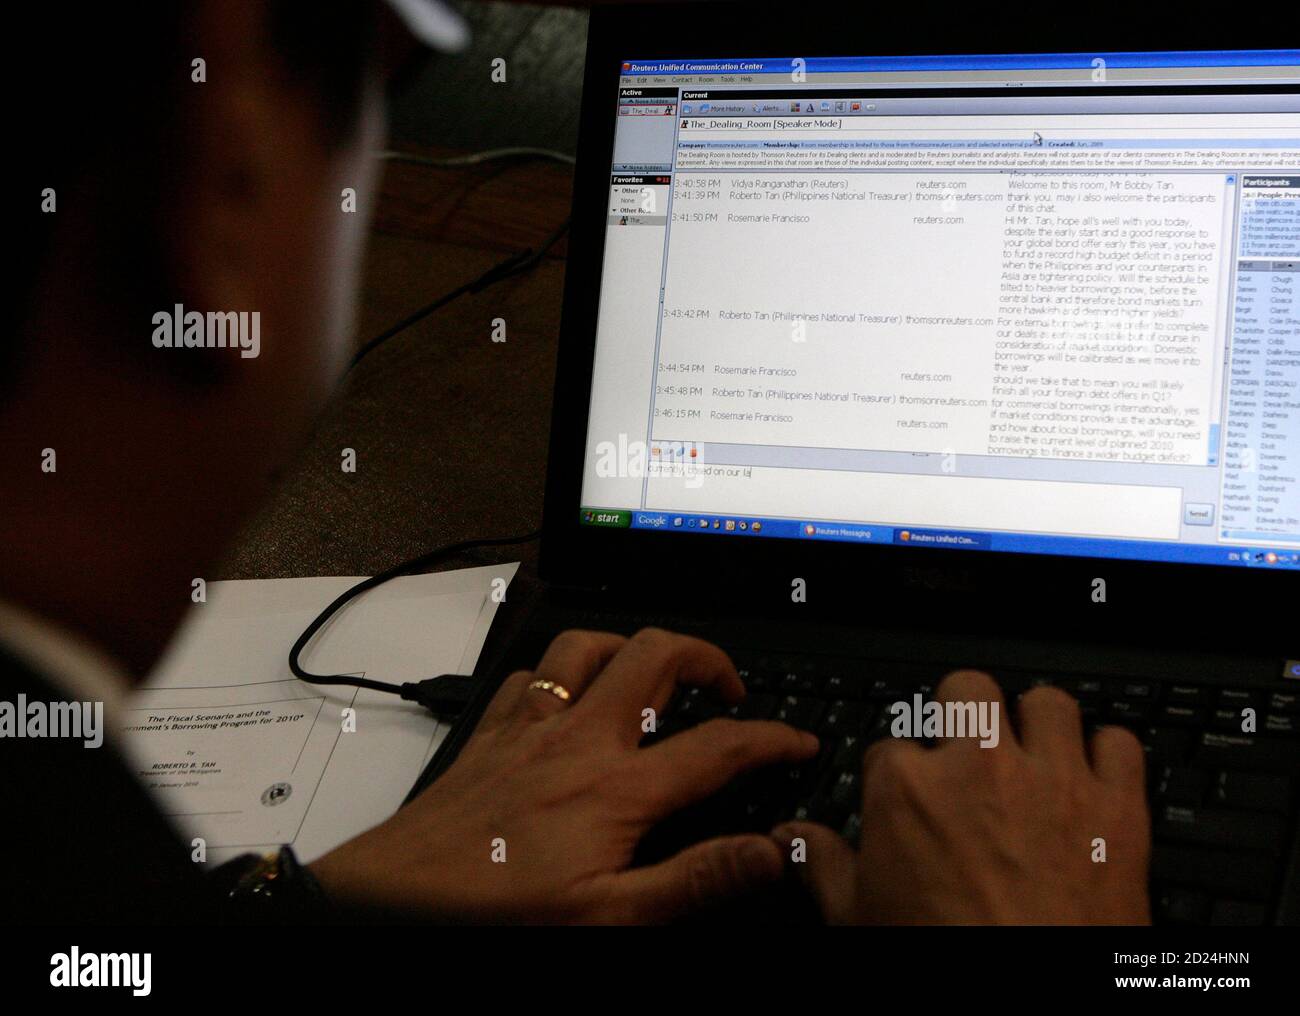 National Treasurer Roberto Tan types his answer in the Dealing Room, a Reuters Messaging chatroom, during an interview in Manila January 25, 2010. The Philippines may complete its foreign debt issues for this year by March if market conditions are good, Tan said on Monday.  REUTERS/Cheryl Ravelo  (PHILIPPINES - Tags: BUSINESS) Stock Photo